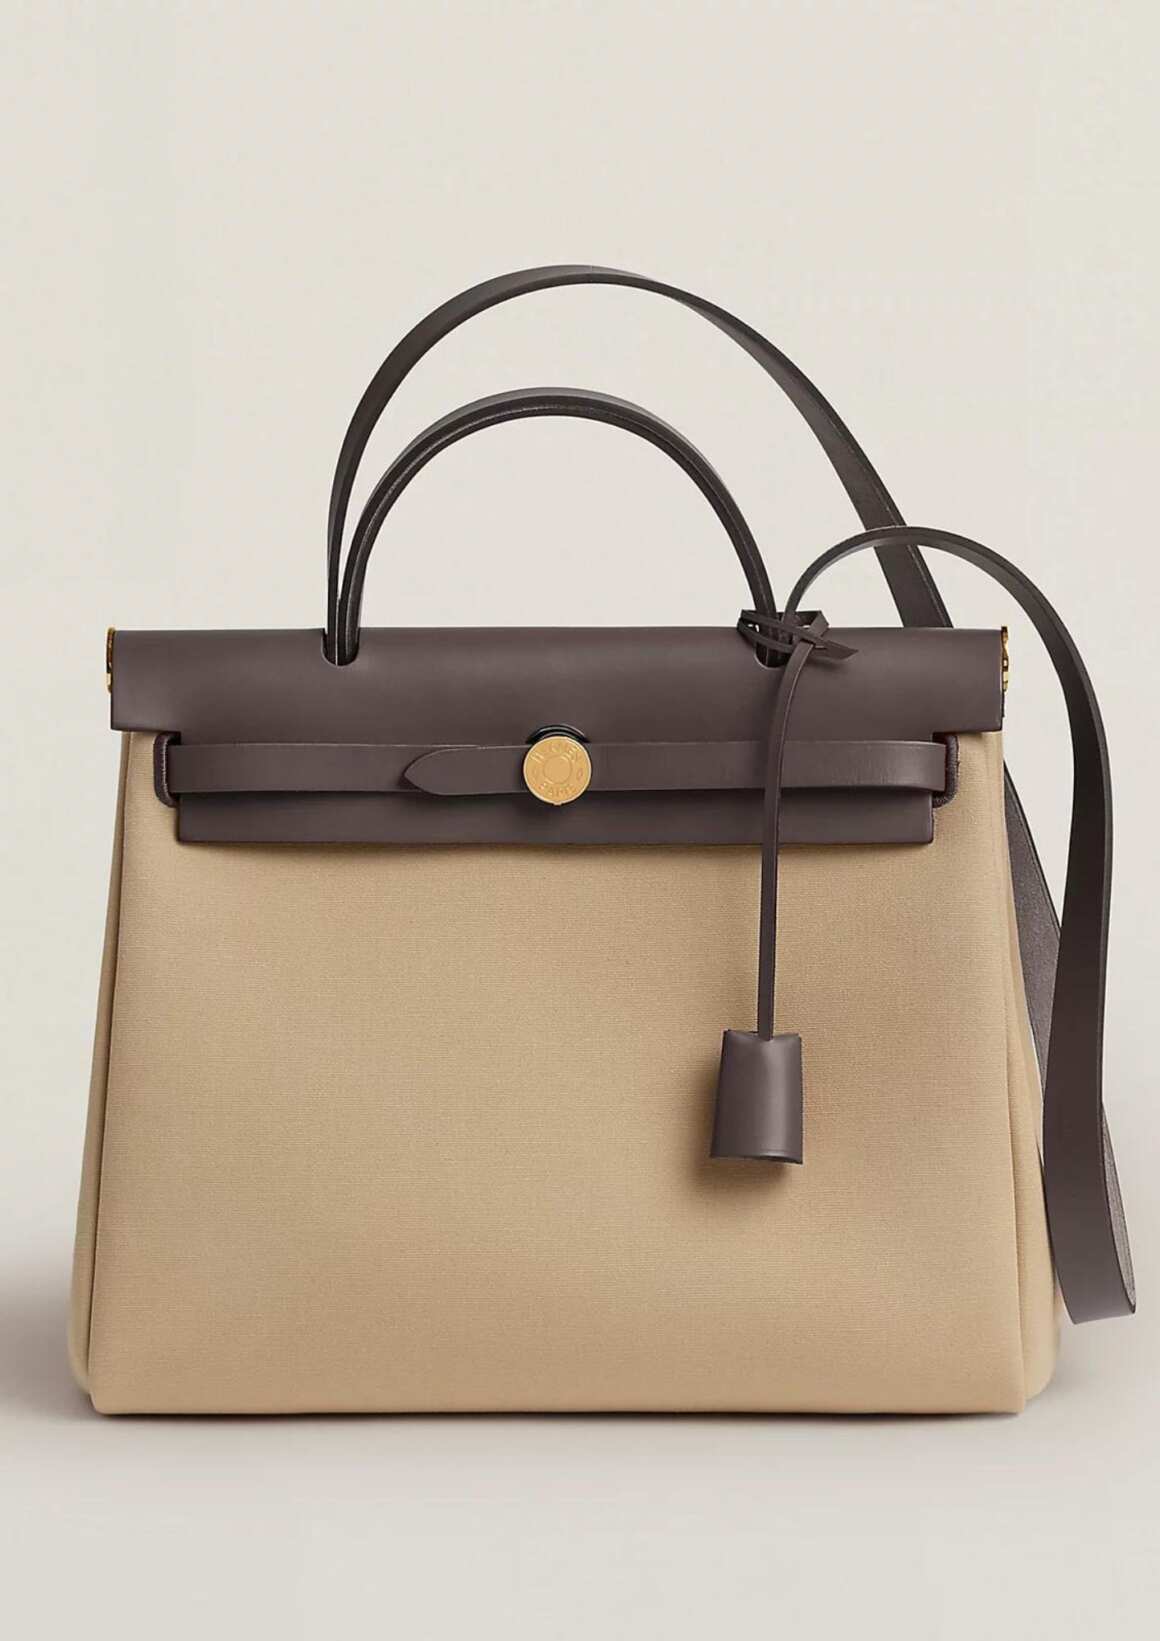 From Birkin to Constance: Here are some of the Hermès bags to invest in